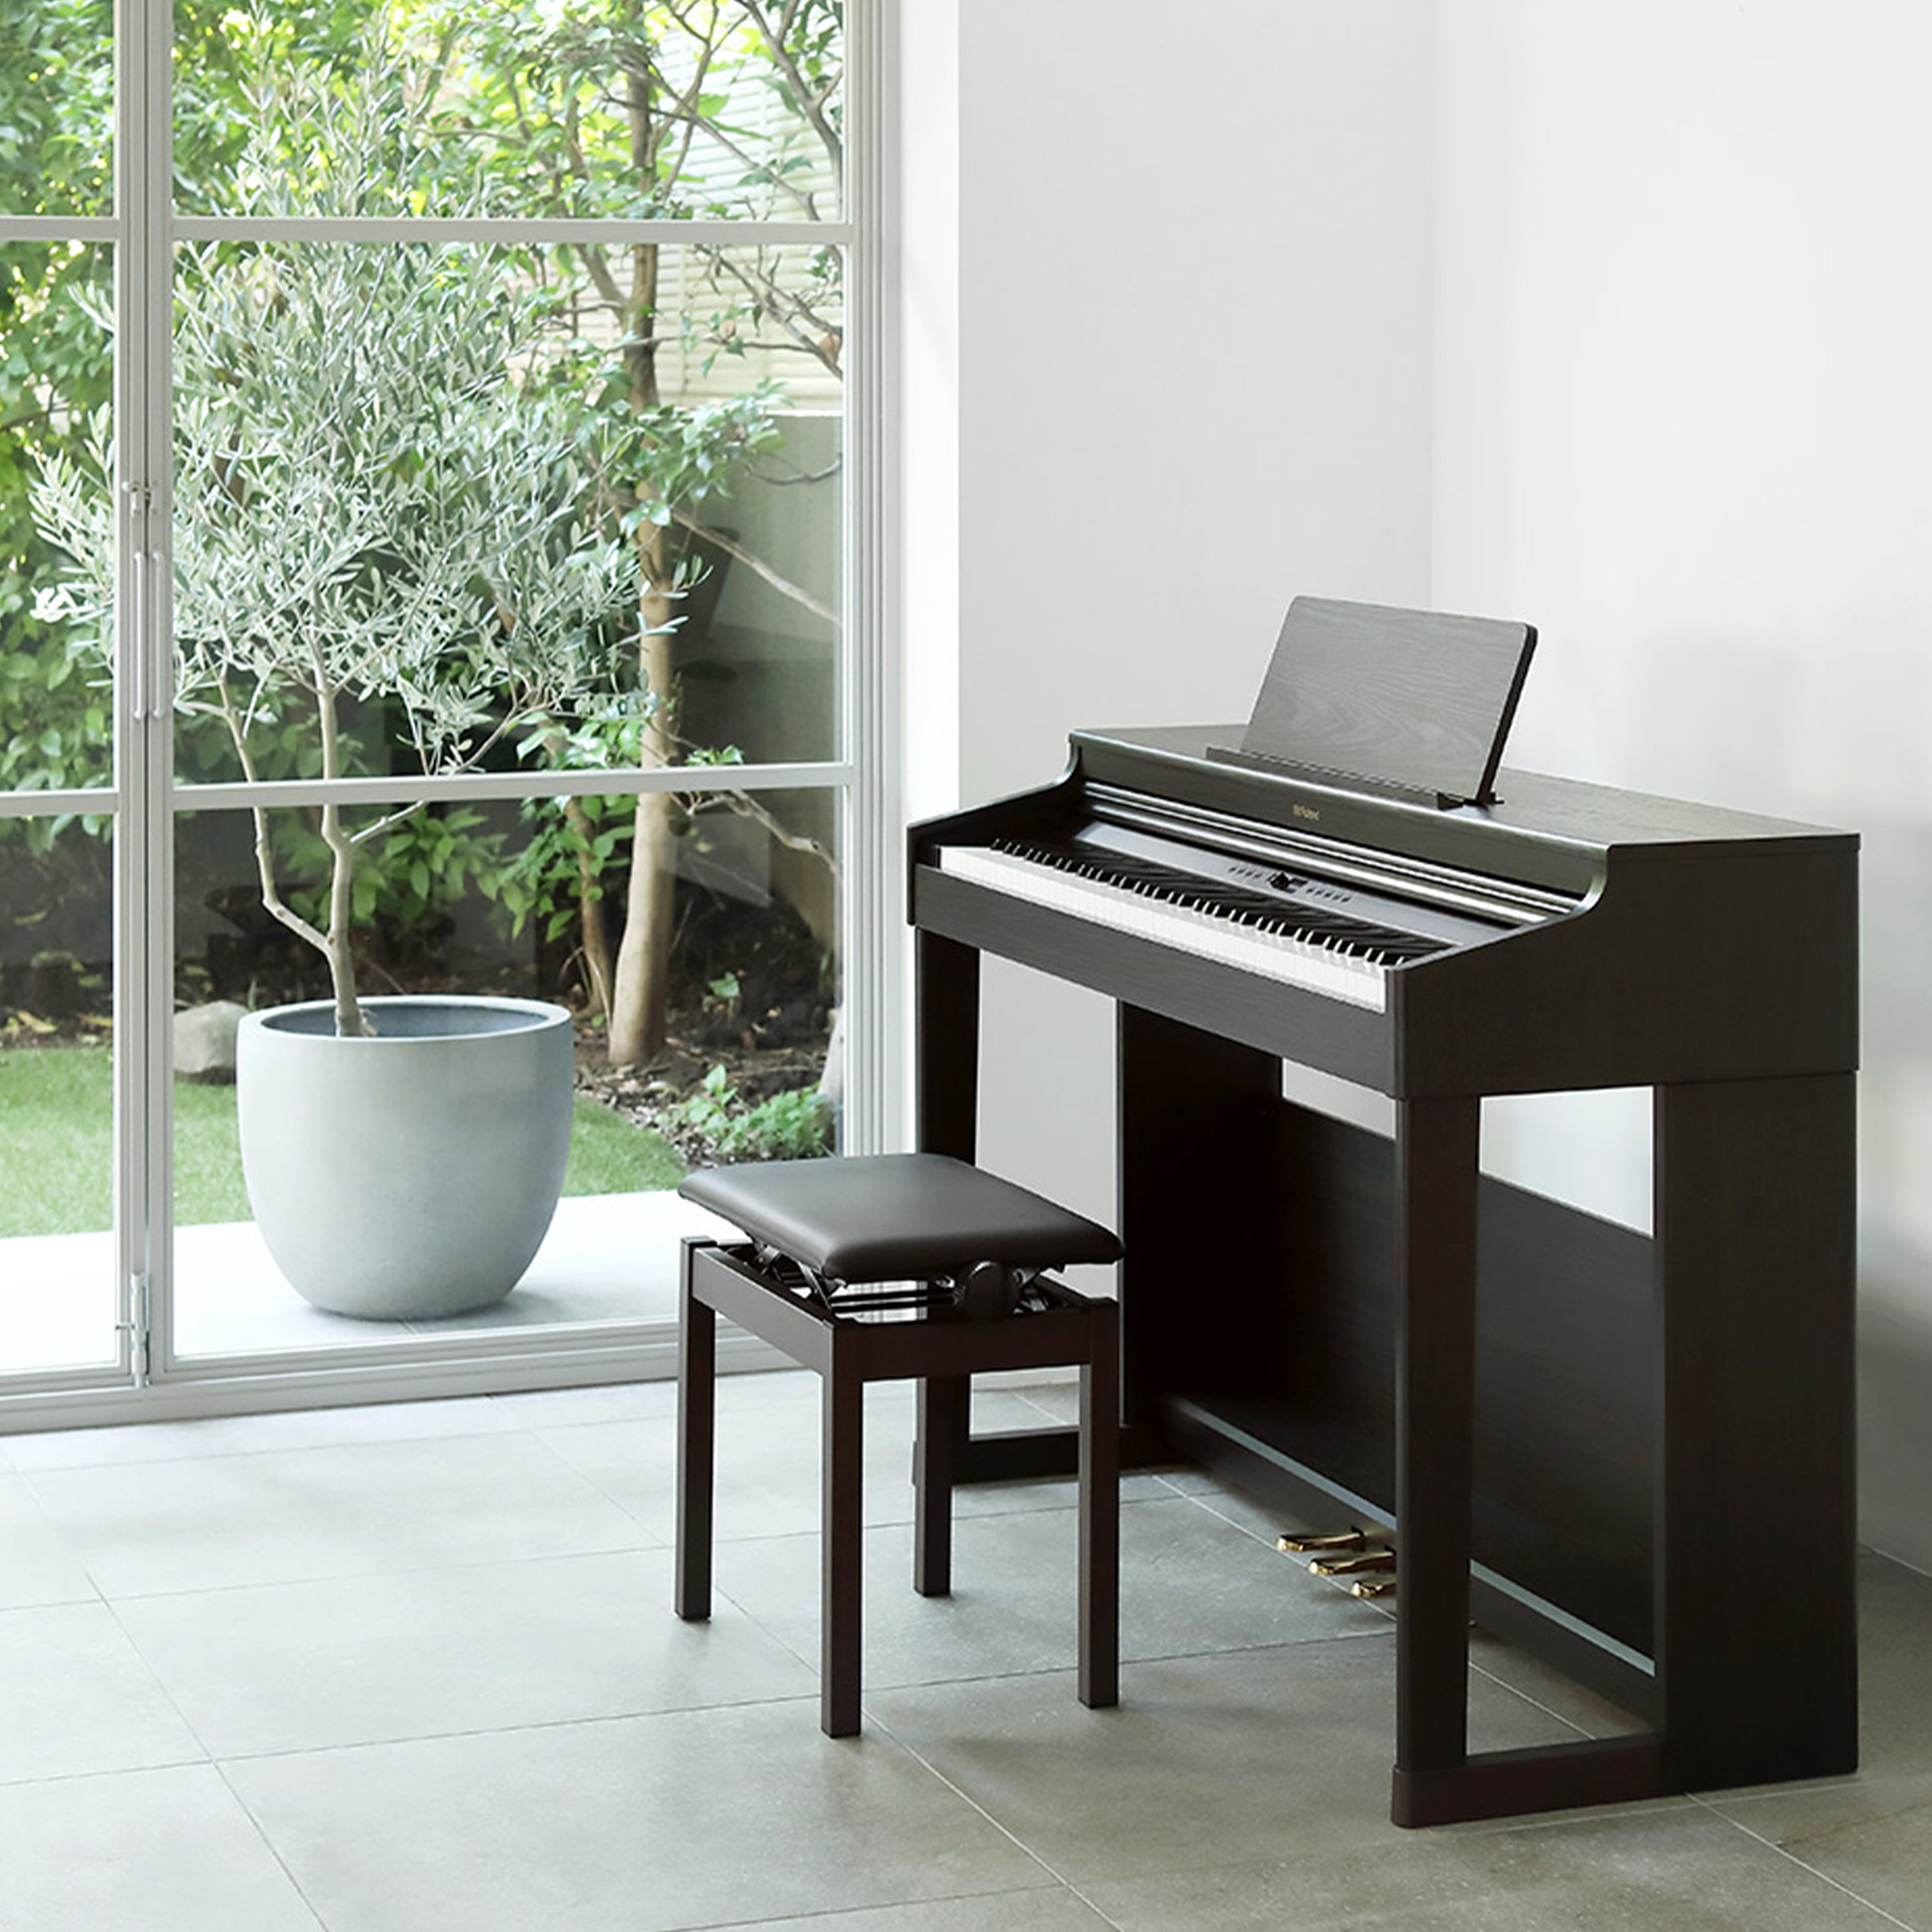 Roland RP701 Digital Piano - Dark Rosewood - in a stylish living room